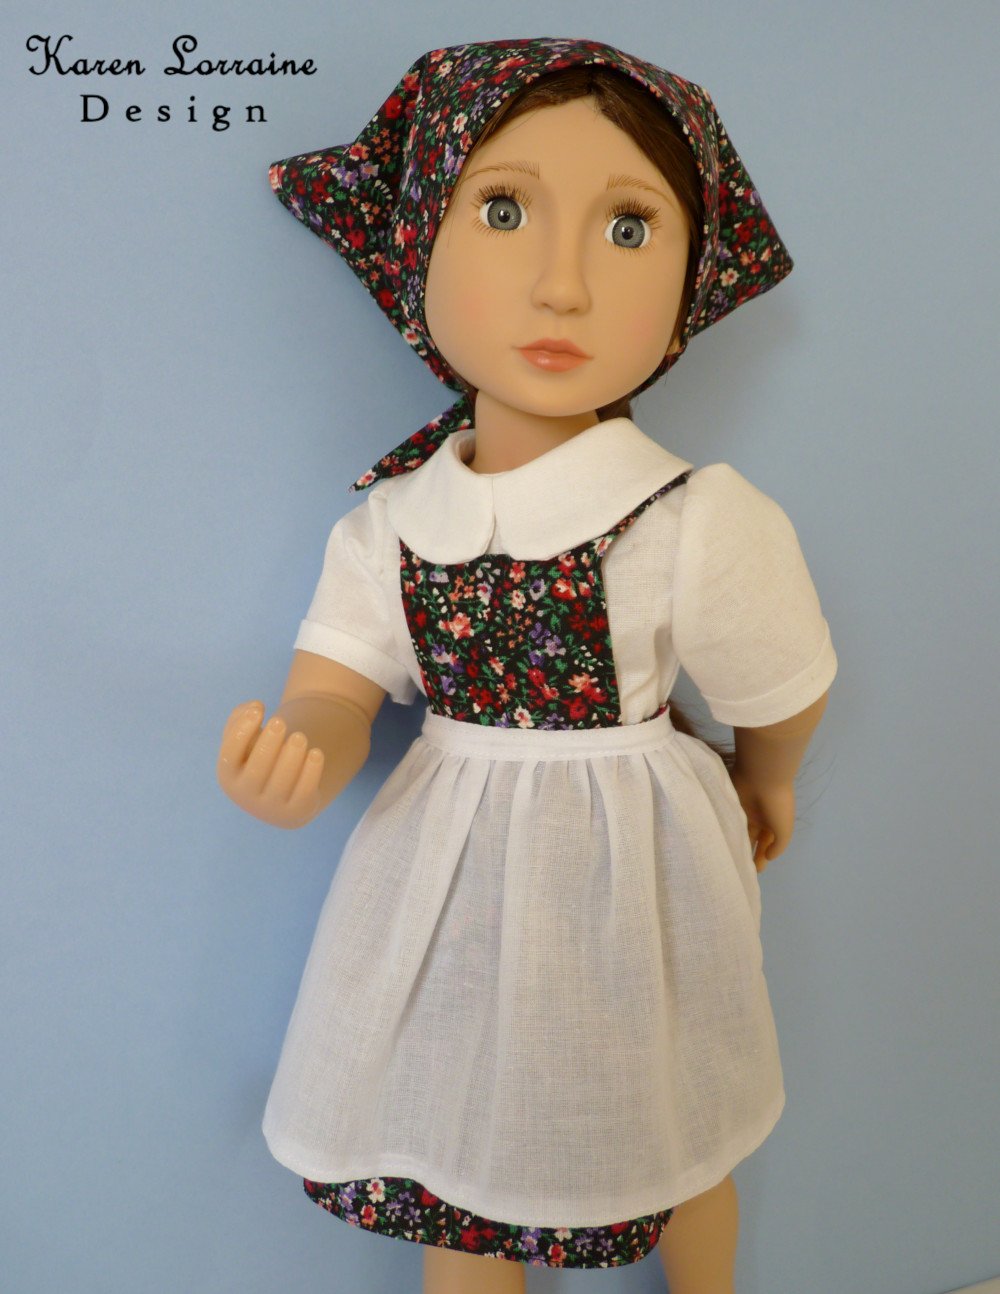 Karen Lorraine Design Tyrol Doll Clothes Pattern for 18 inch dolls such as American  Girl®